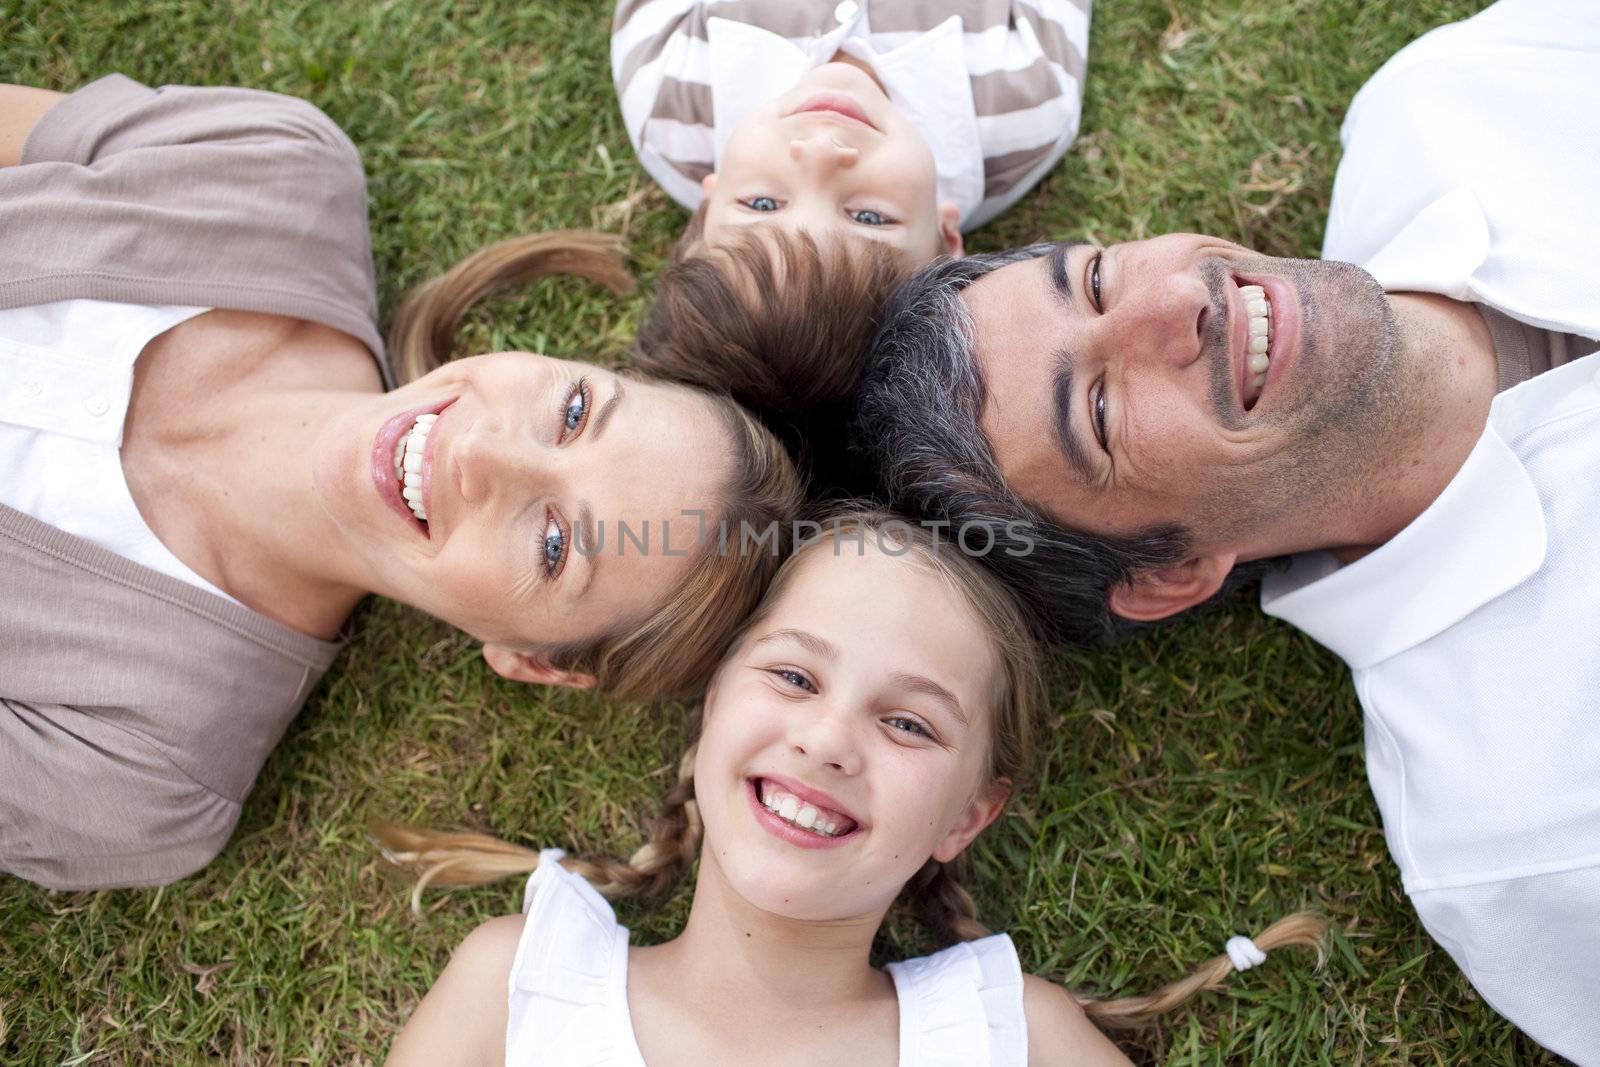 Smiling family lying outdoors with heads together